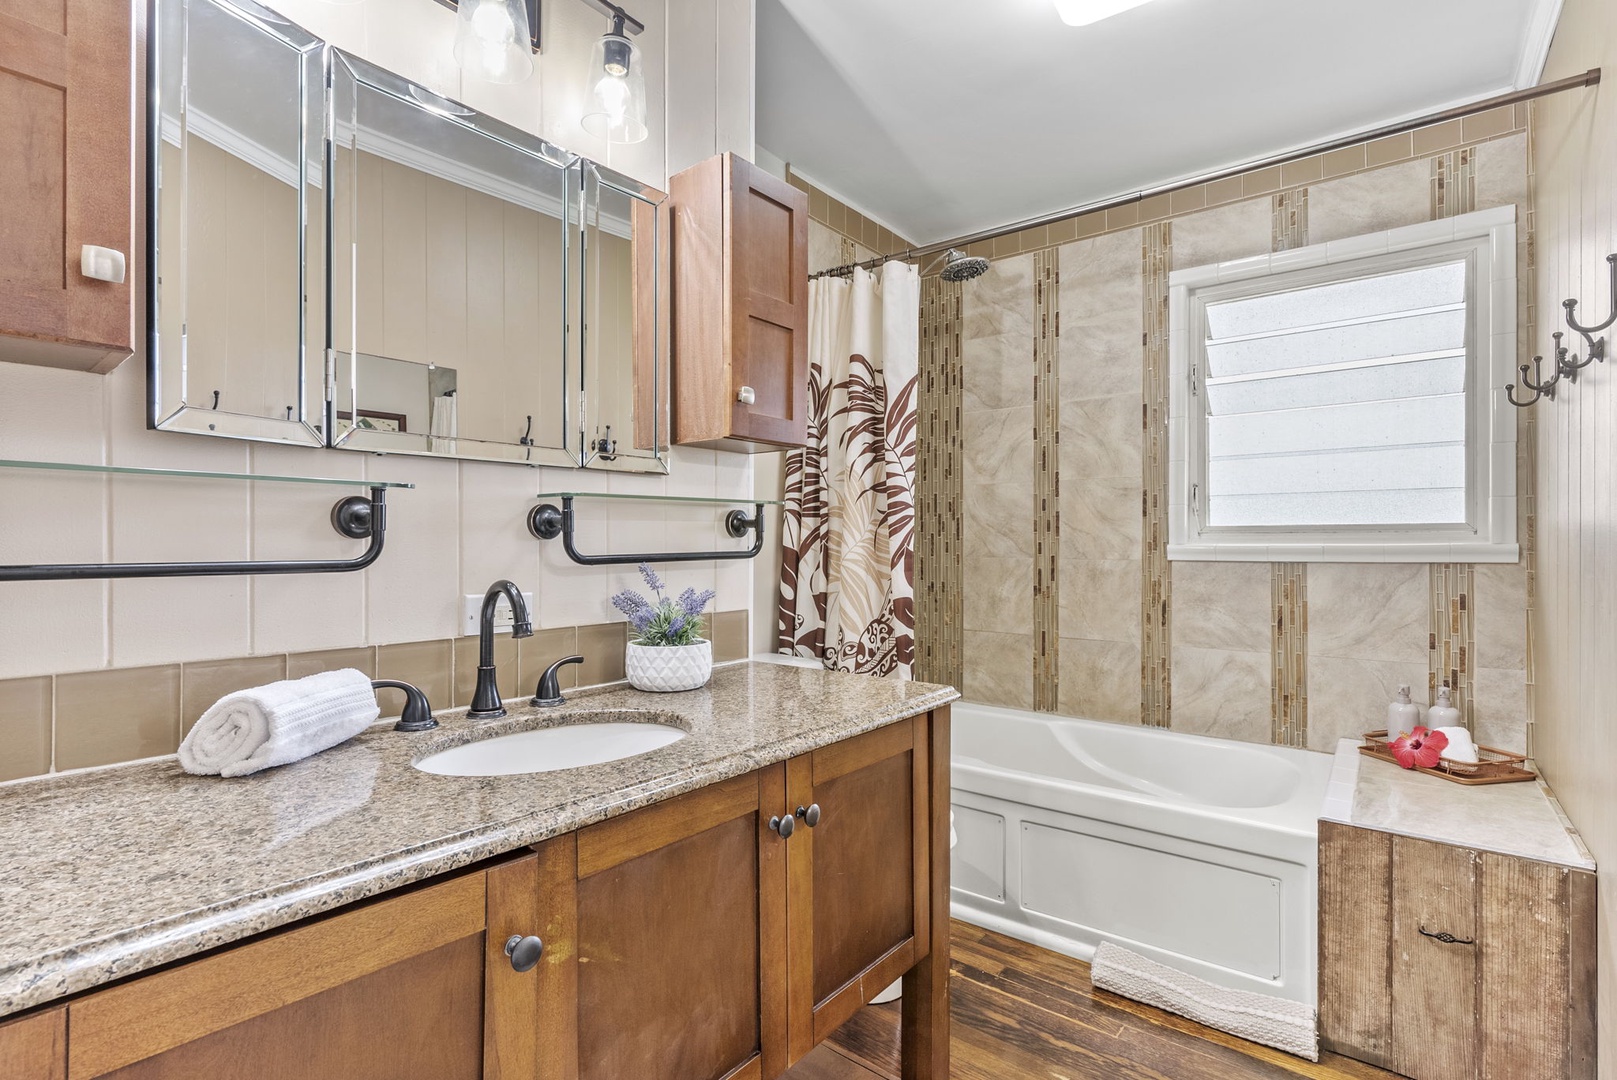 Hauula Vacation Rentals, Mau Loa Hale - Guest bathroom with plenty of storage and counterspace